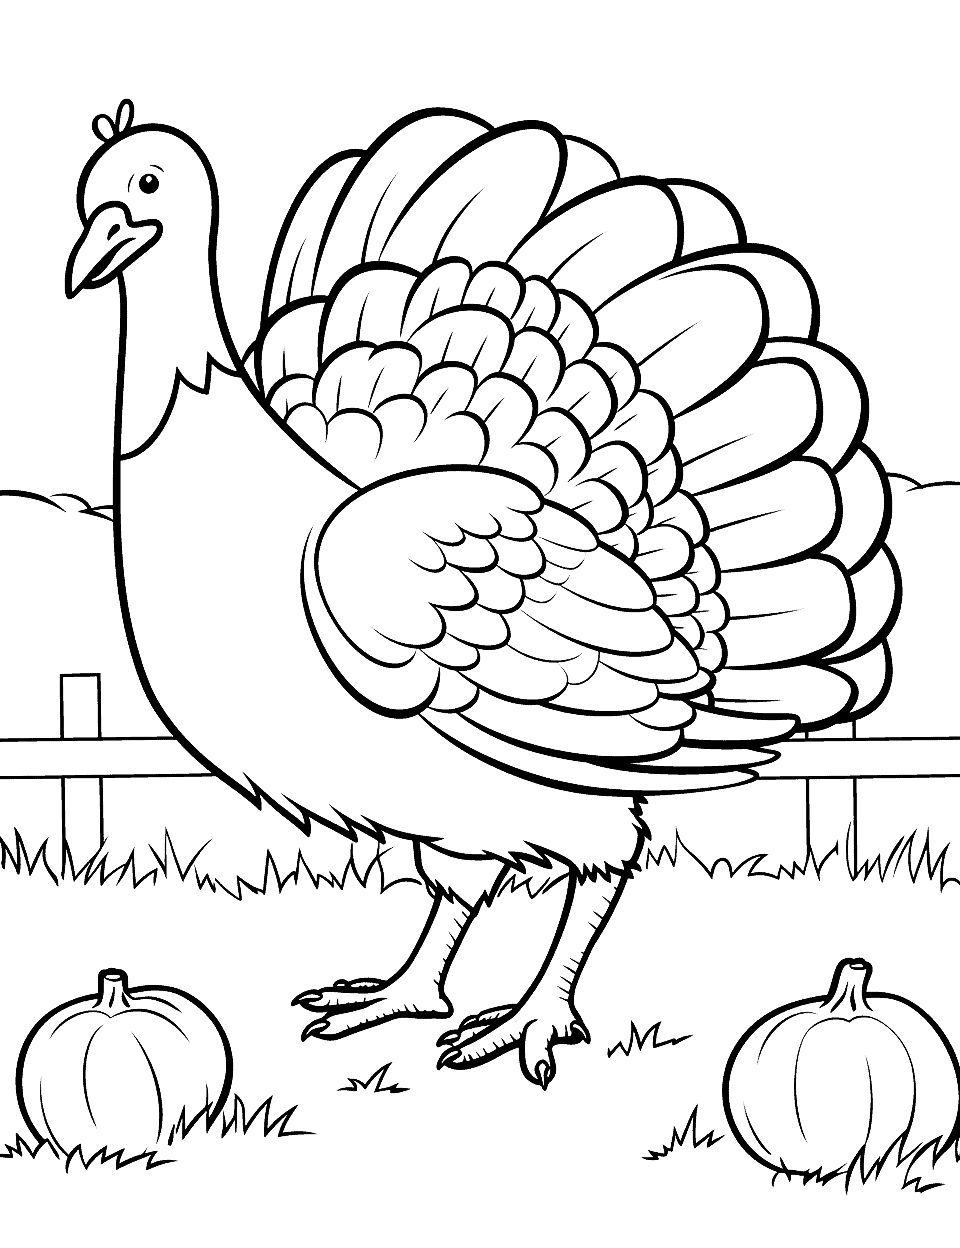 Large Turkey on the Farm Coloring Page - A large turkey strutting around a farm, which offers a lot of scenery to color.